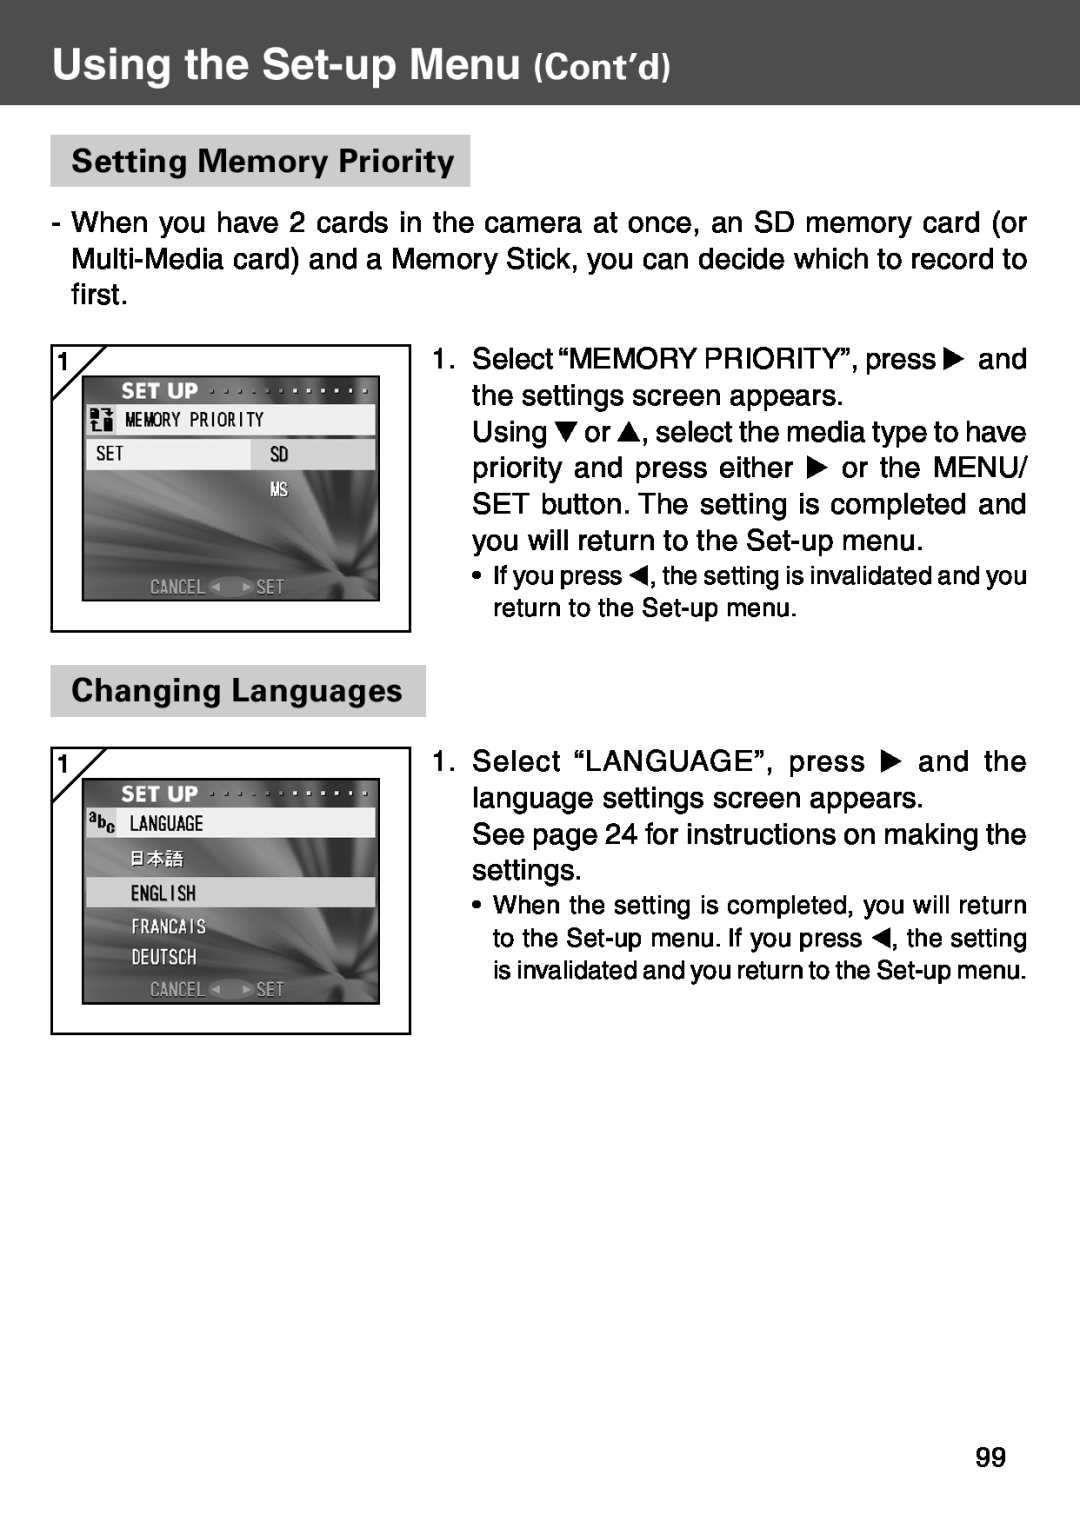 Konica Minolta KD-500Z user manual Setting Memory Priority, Changing Languages, Using the Set-up Menu Cont’d 